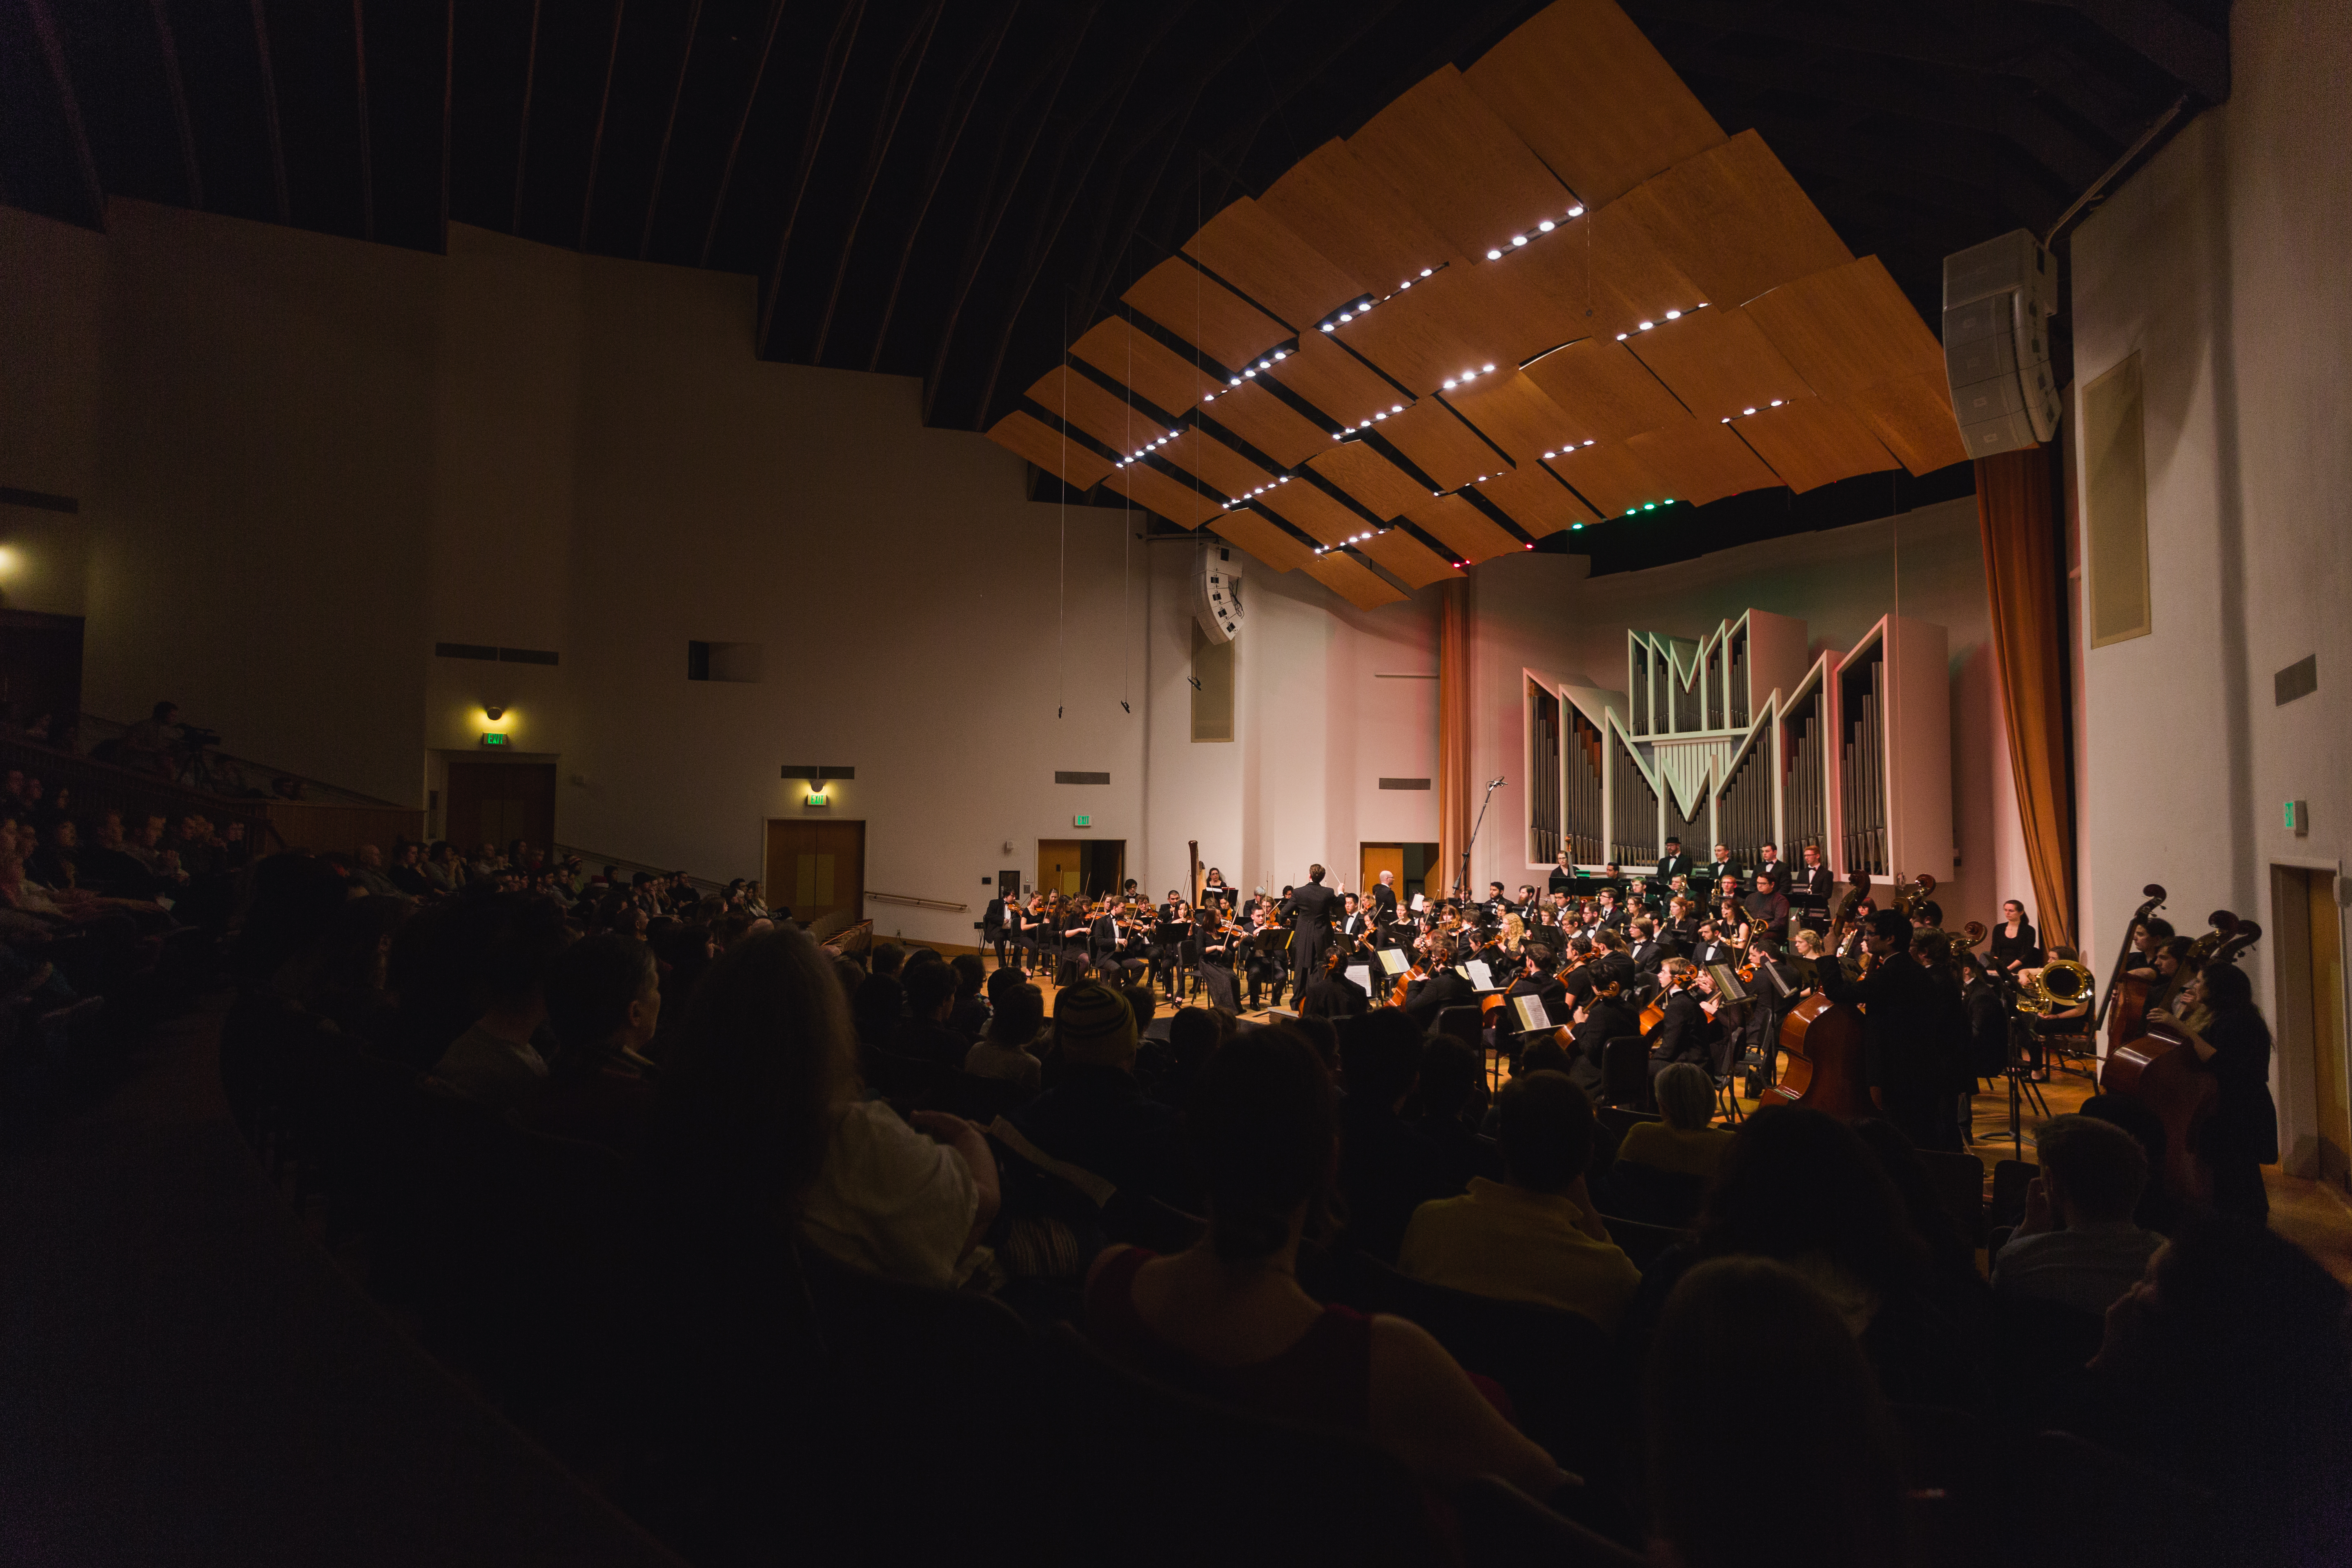 A view of the concert hall from the audience during a performance.